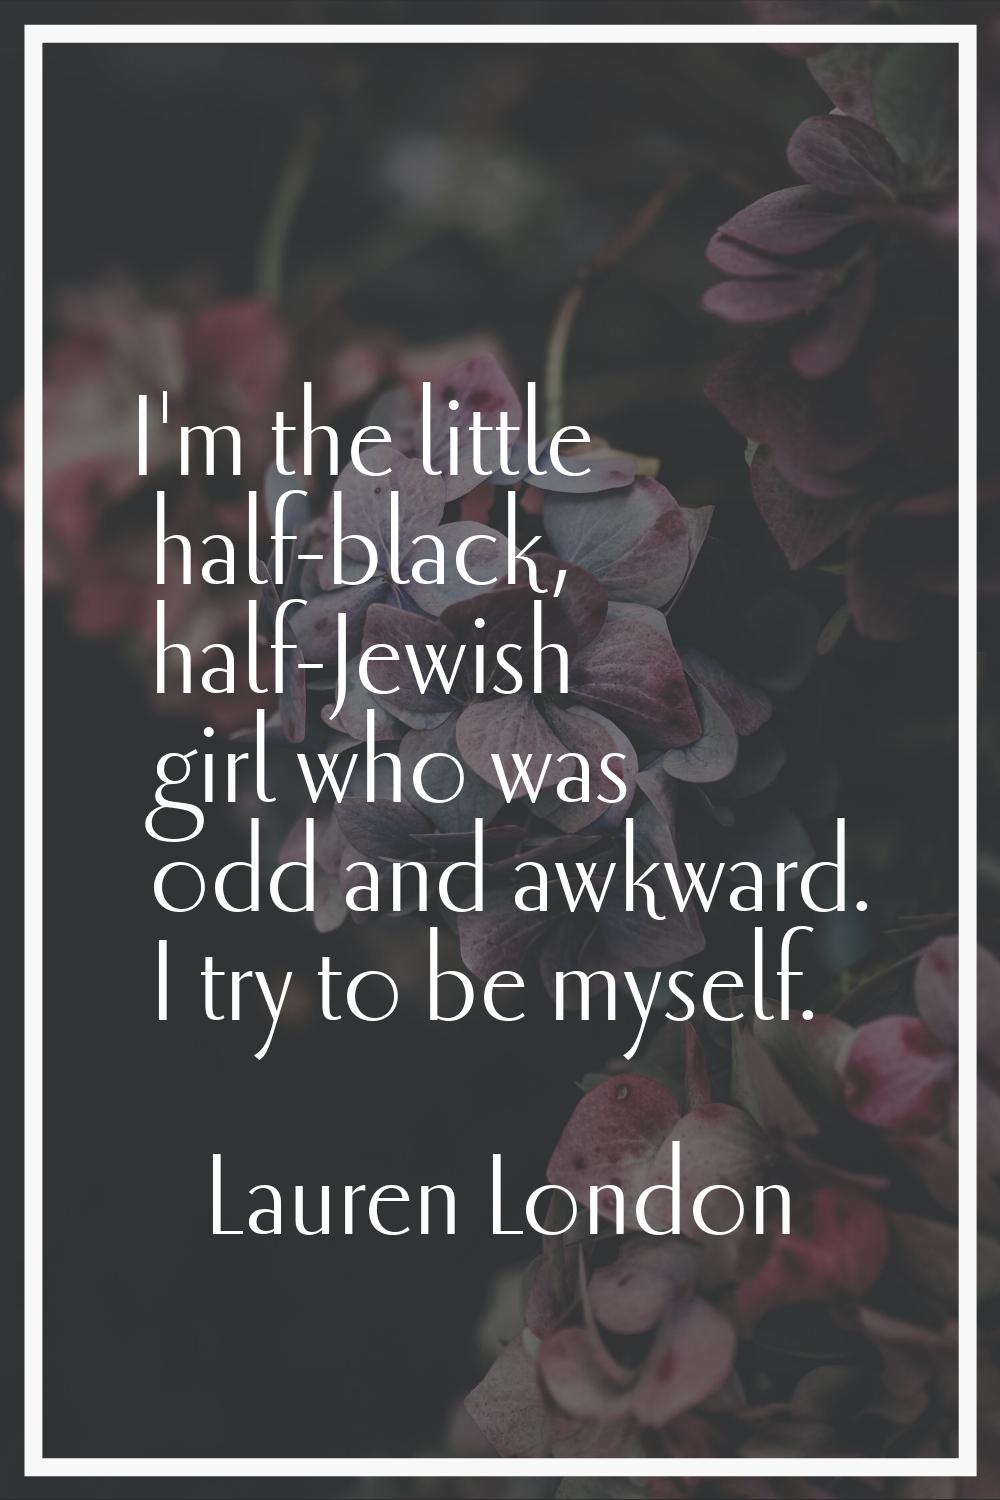 I'm the little half-black, half-Jewish girl who was odd and awkward. I try to be myself.